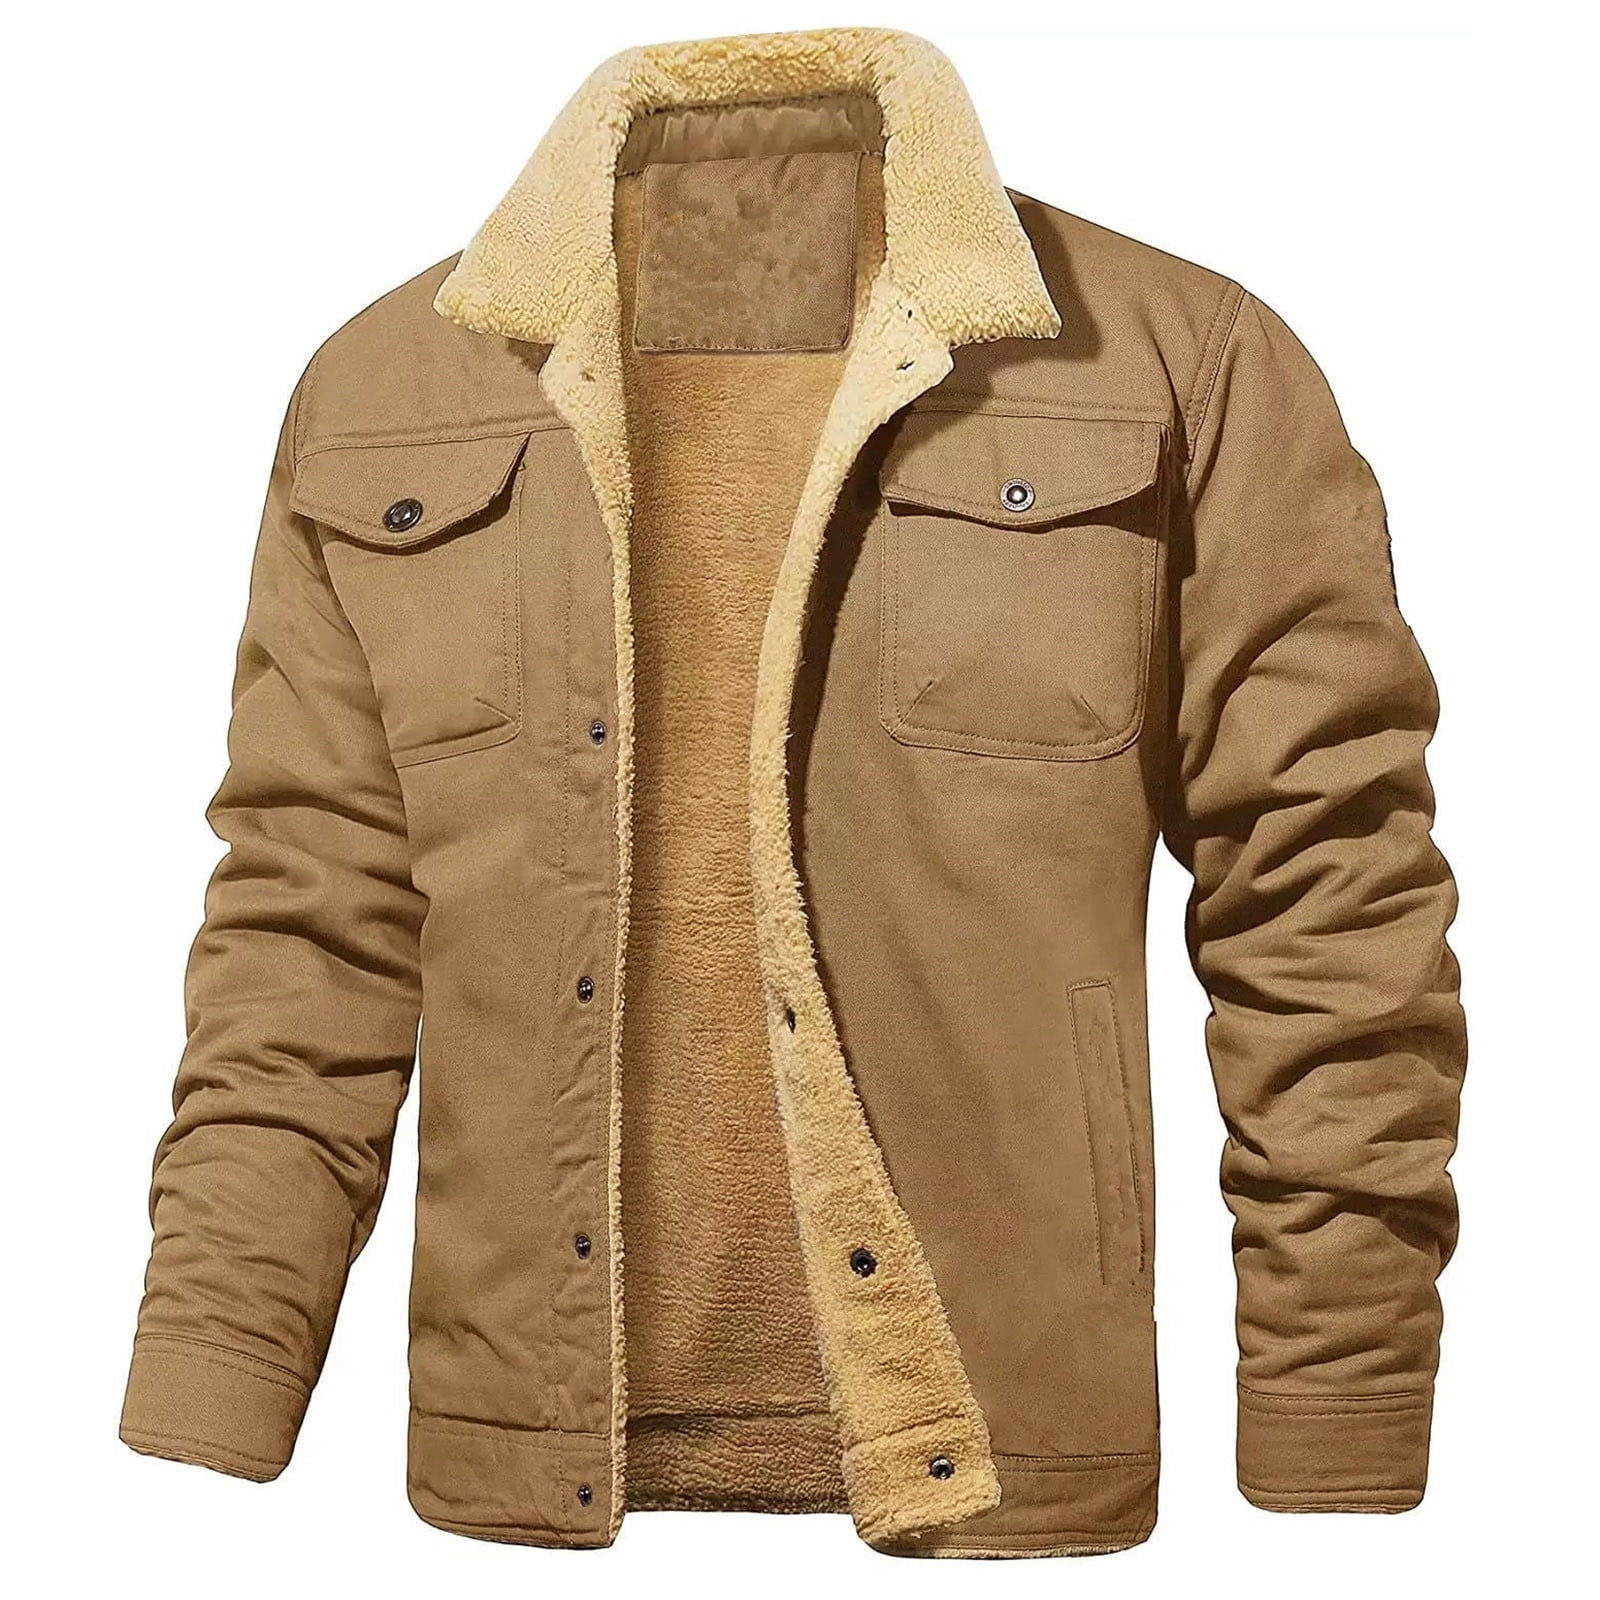 Hot6sl Men's Corduroy Casual Jacket Cotton Lined Fleece Lapel Thickened ...